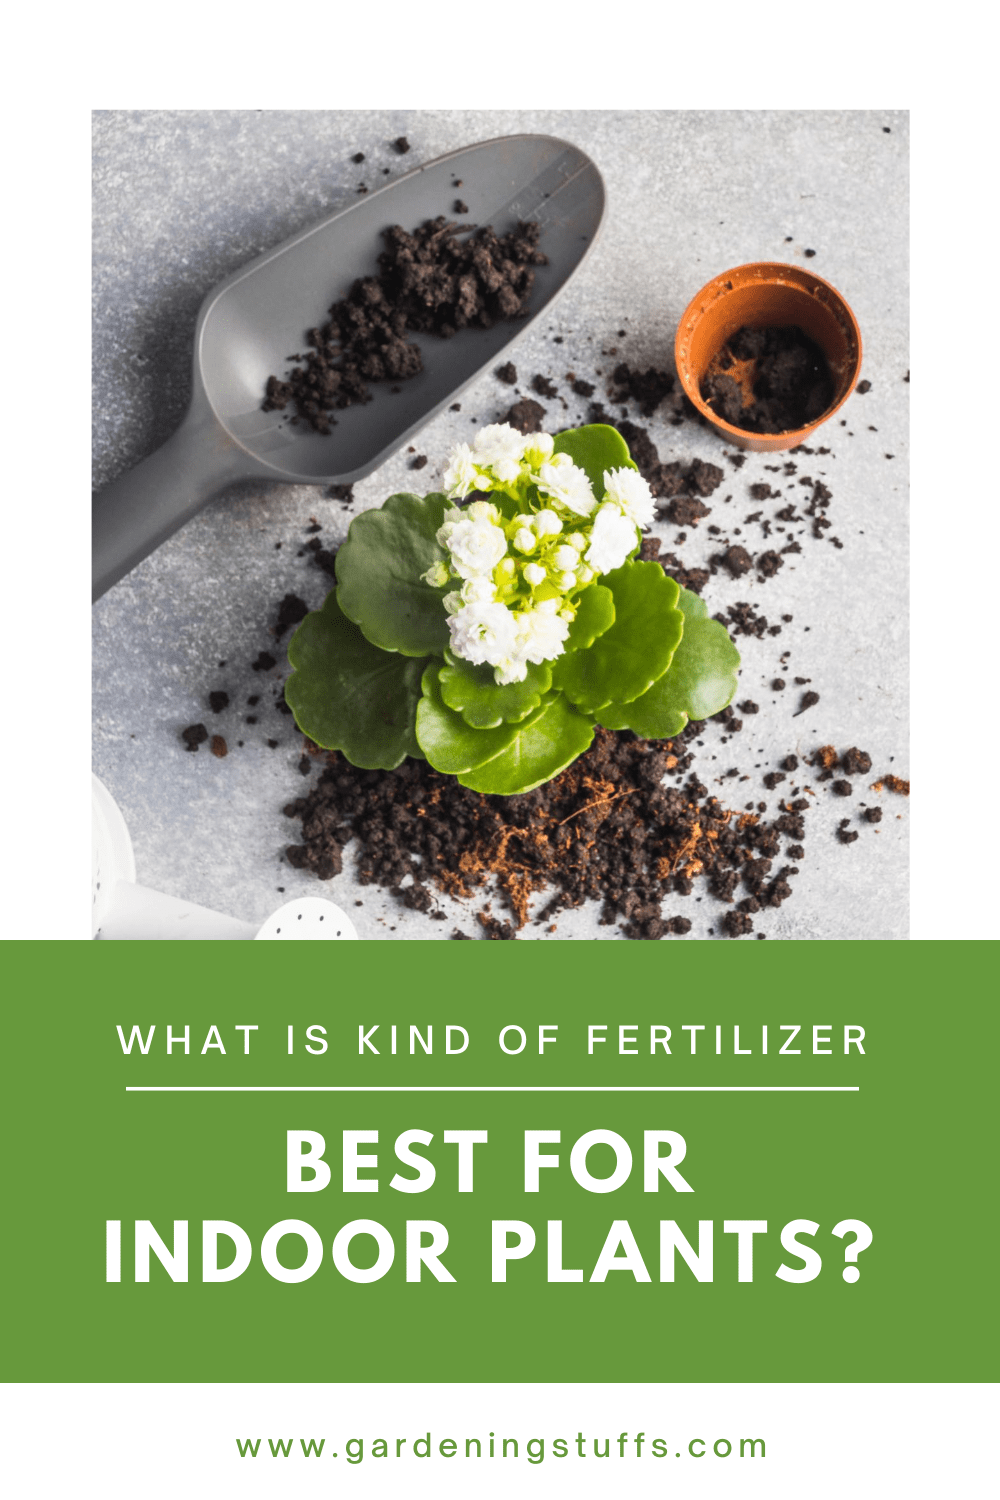 There are various types of fertilizers to choose from, making it tricky to find the right one for your indoor plants. Check out some of the best fertilizers that can facilitate good growth for most indoor plants.